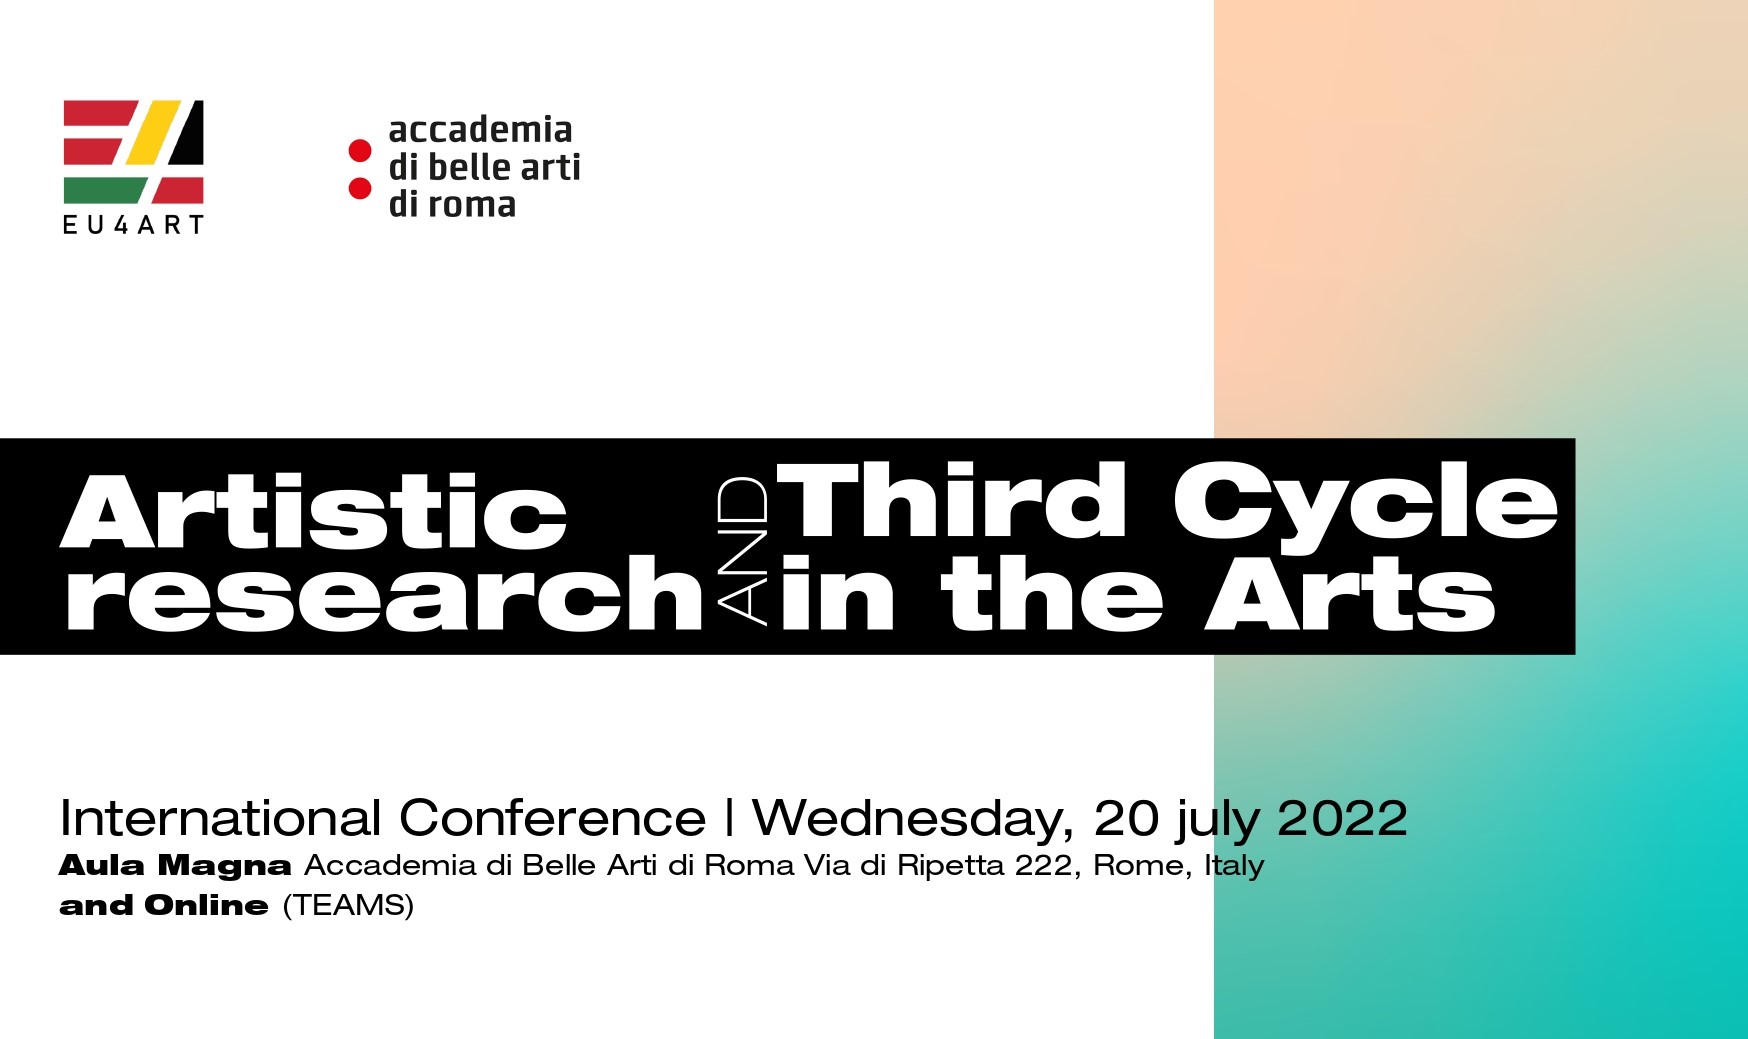  Artistic Research and Third Cycle in the Arts